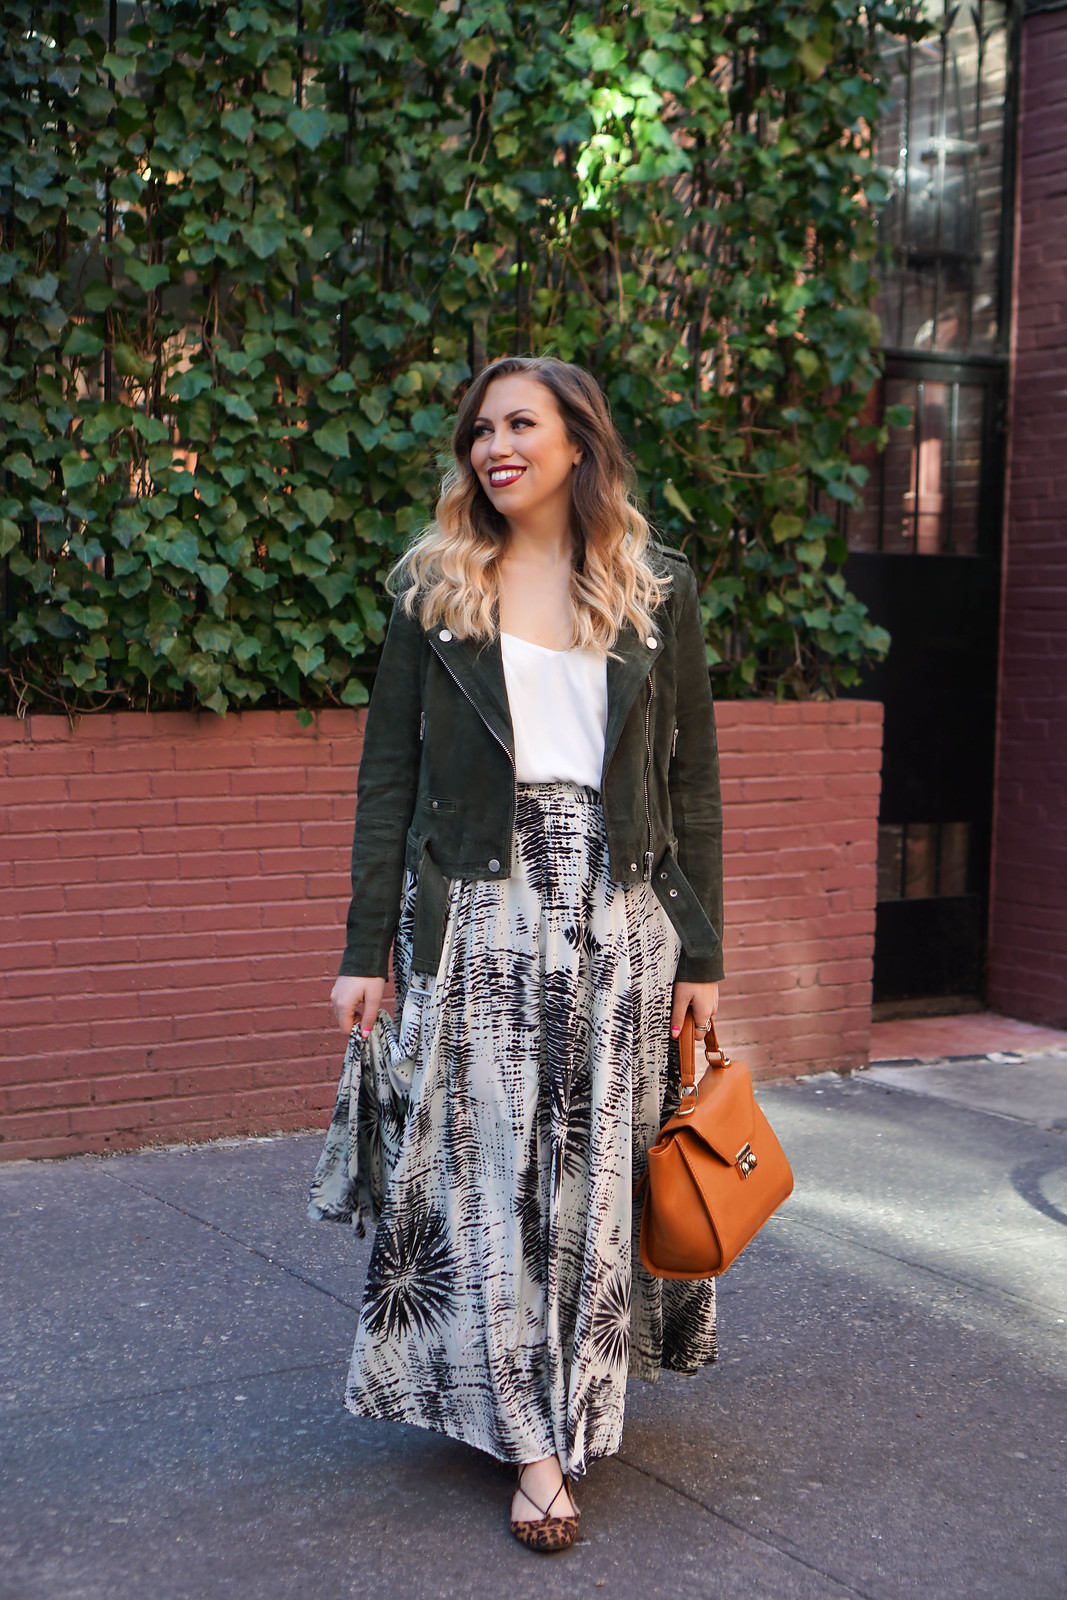 Printed Maxi Skirt | Olive Suede Moto Jacket | Curly Blonde Hair | Urban Decay Vice Liquid Lipstick in 714 | Spring NYC Outfit 